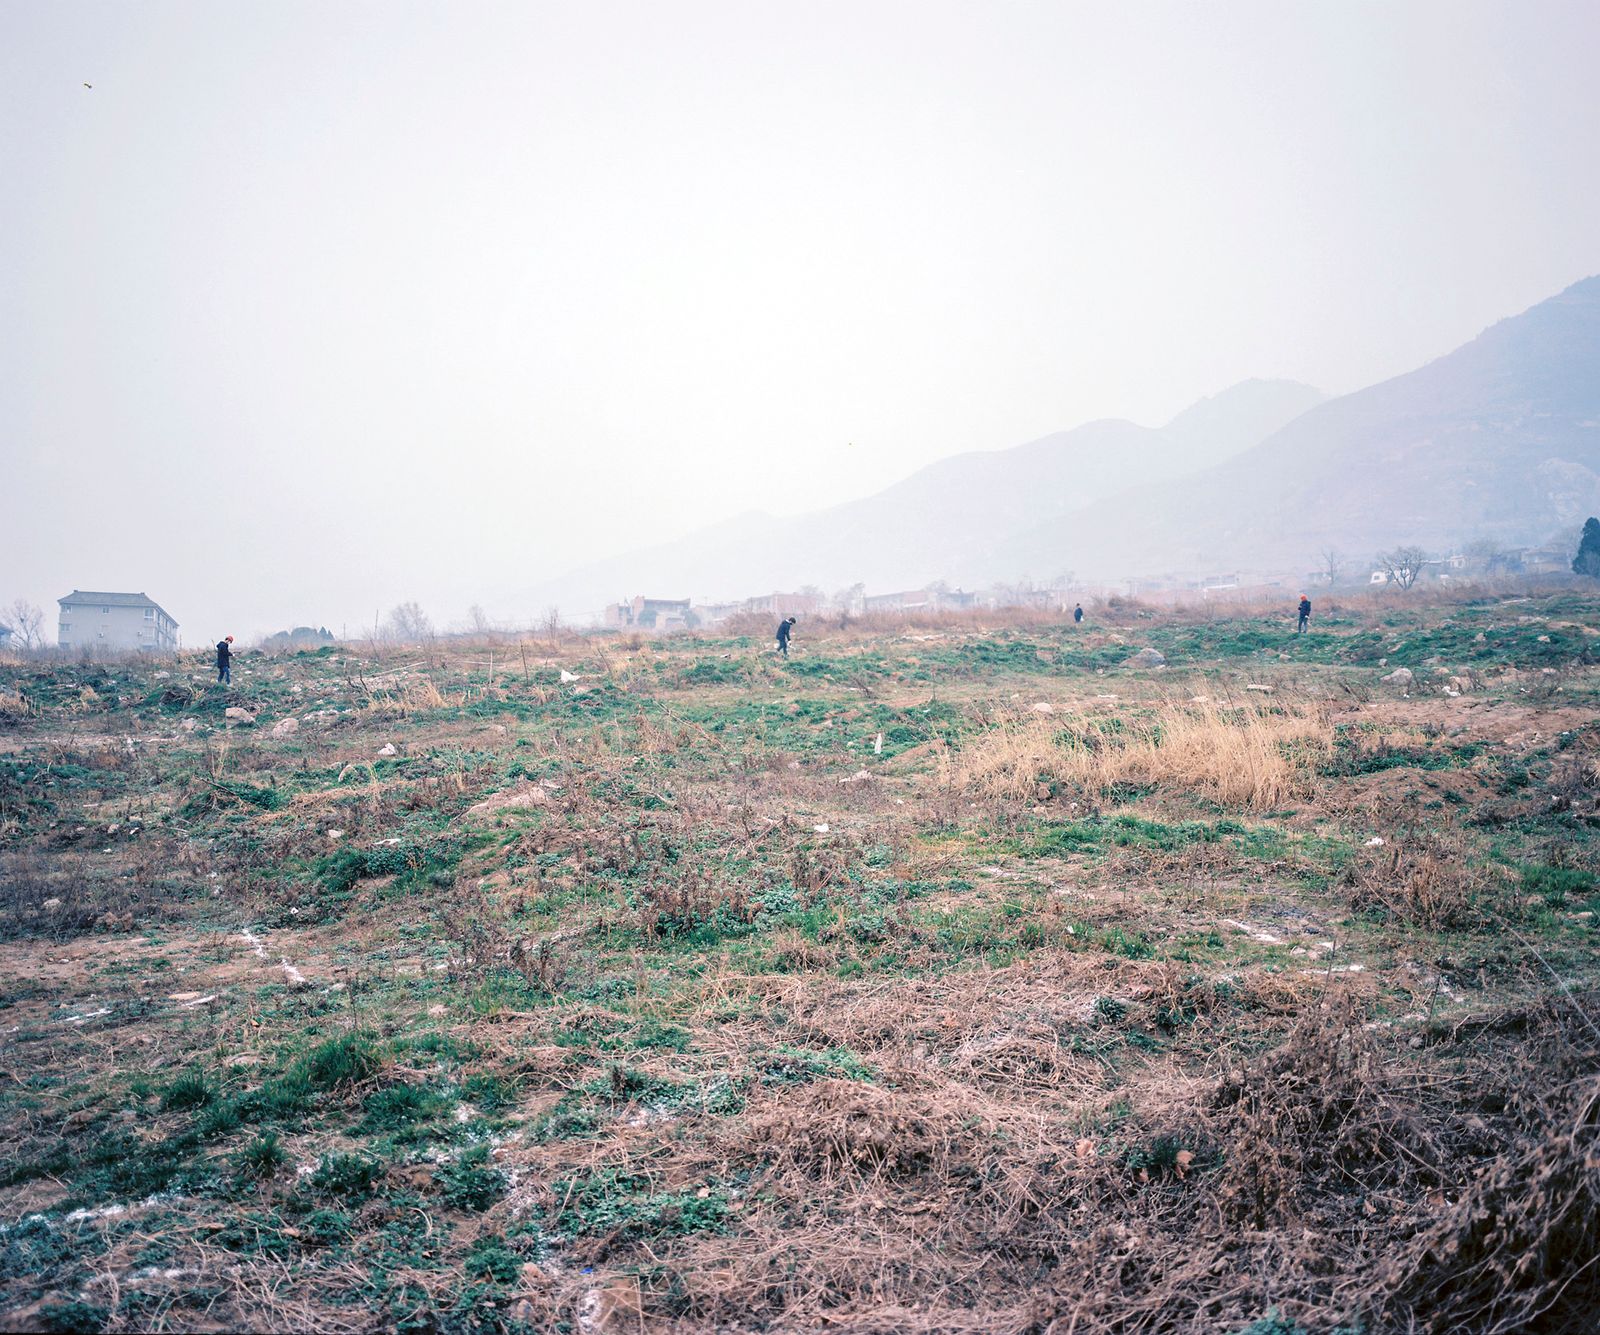 © Pan Wang - 13.On the farmland requisitioned for commercial development, construction workers are measuring the land